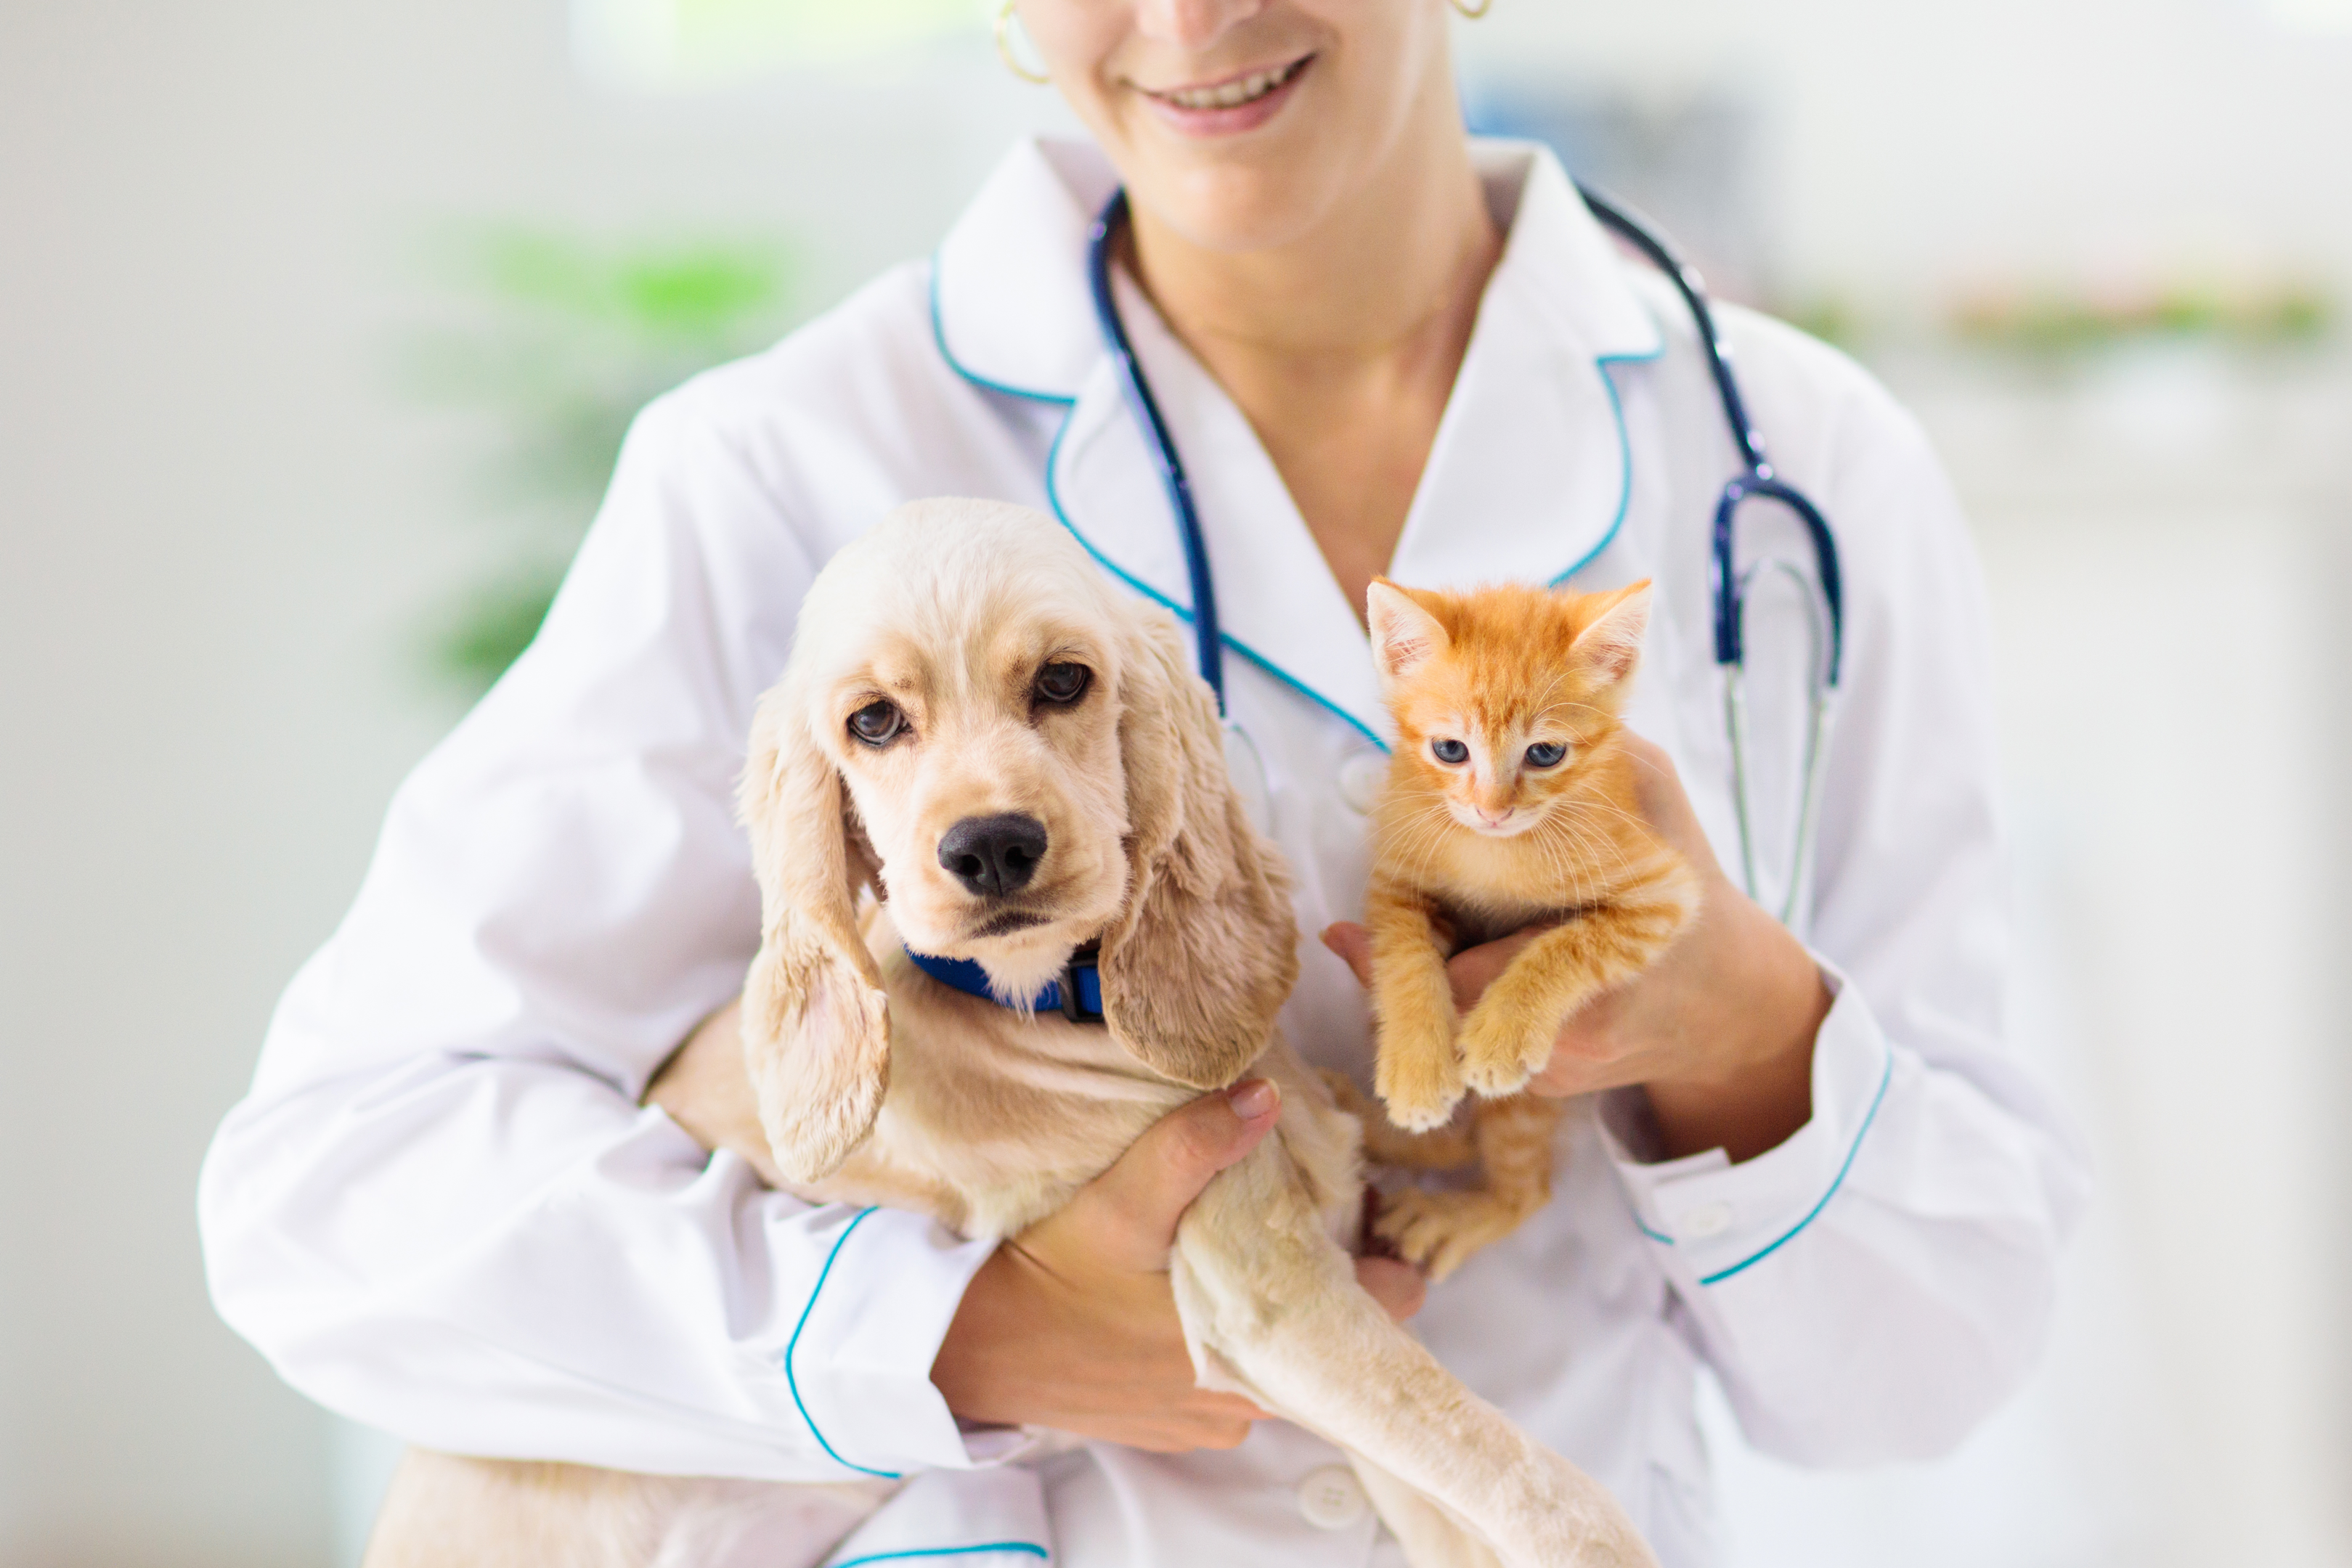 Veterinarian carrying a dog and cat